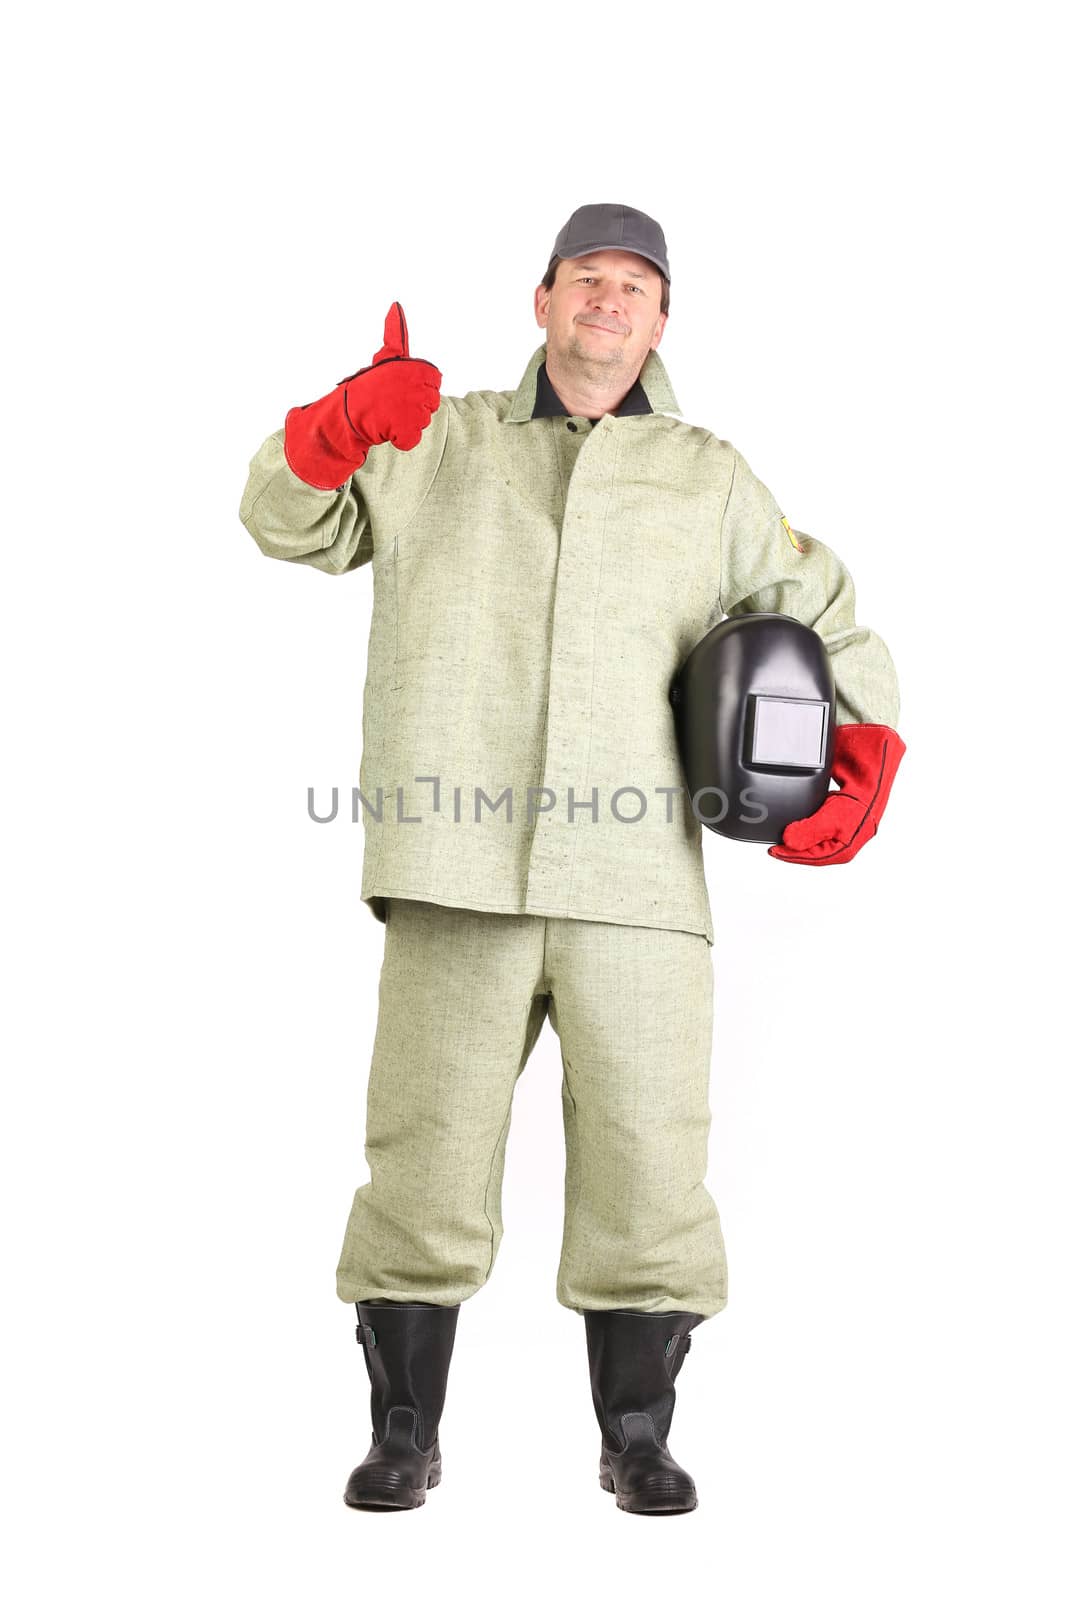 Welder shows okey sign. Isolated on a white background.